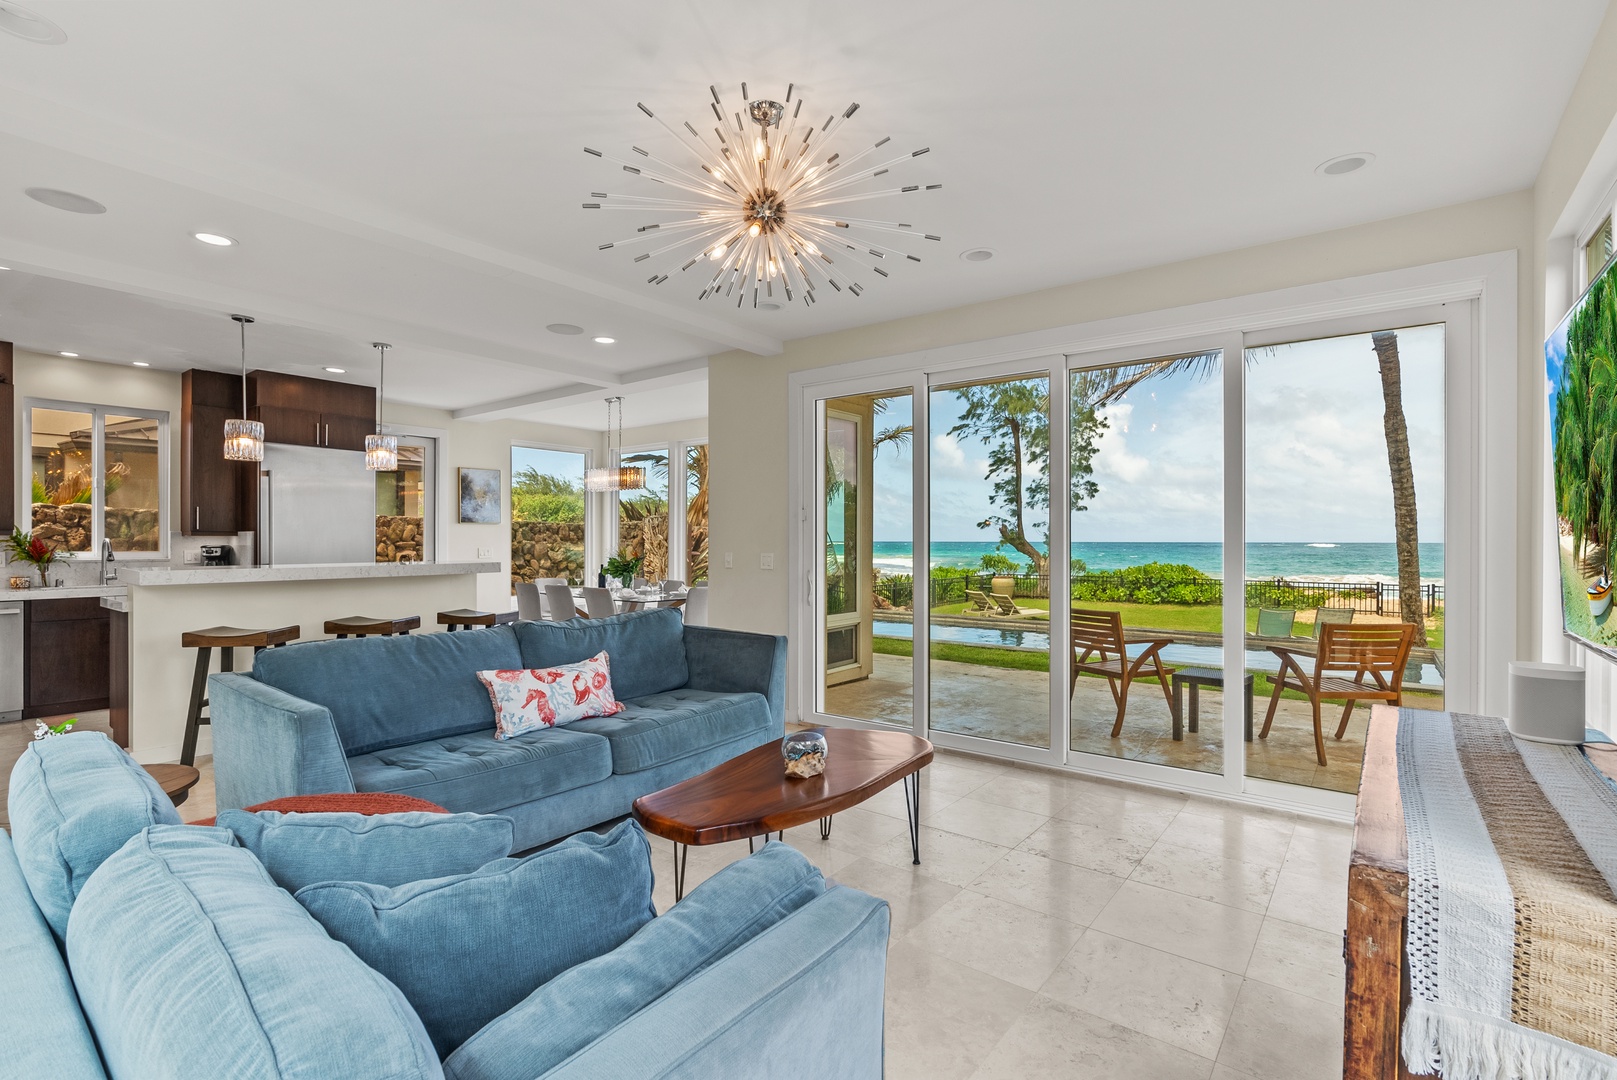 Laie Vacation Rentals, Laie Beachfront Estate - Enjoy the open living area with comfortable seating and large windows showcasing the stunning ocean view.